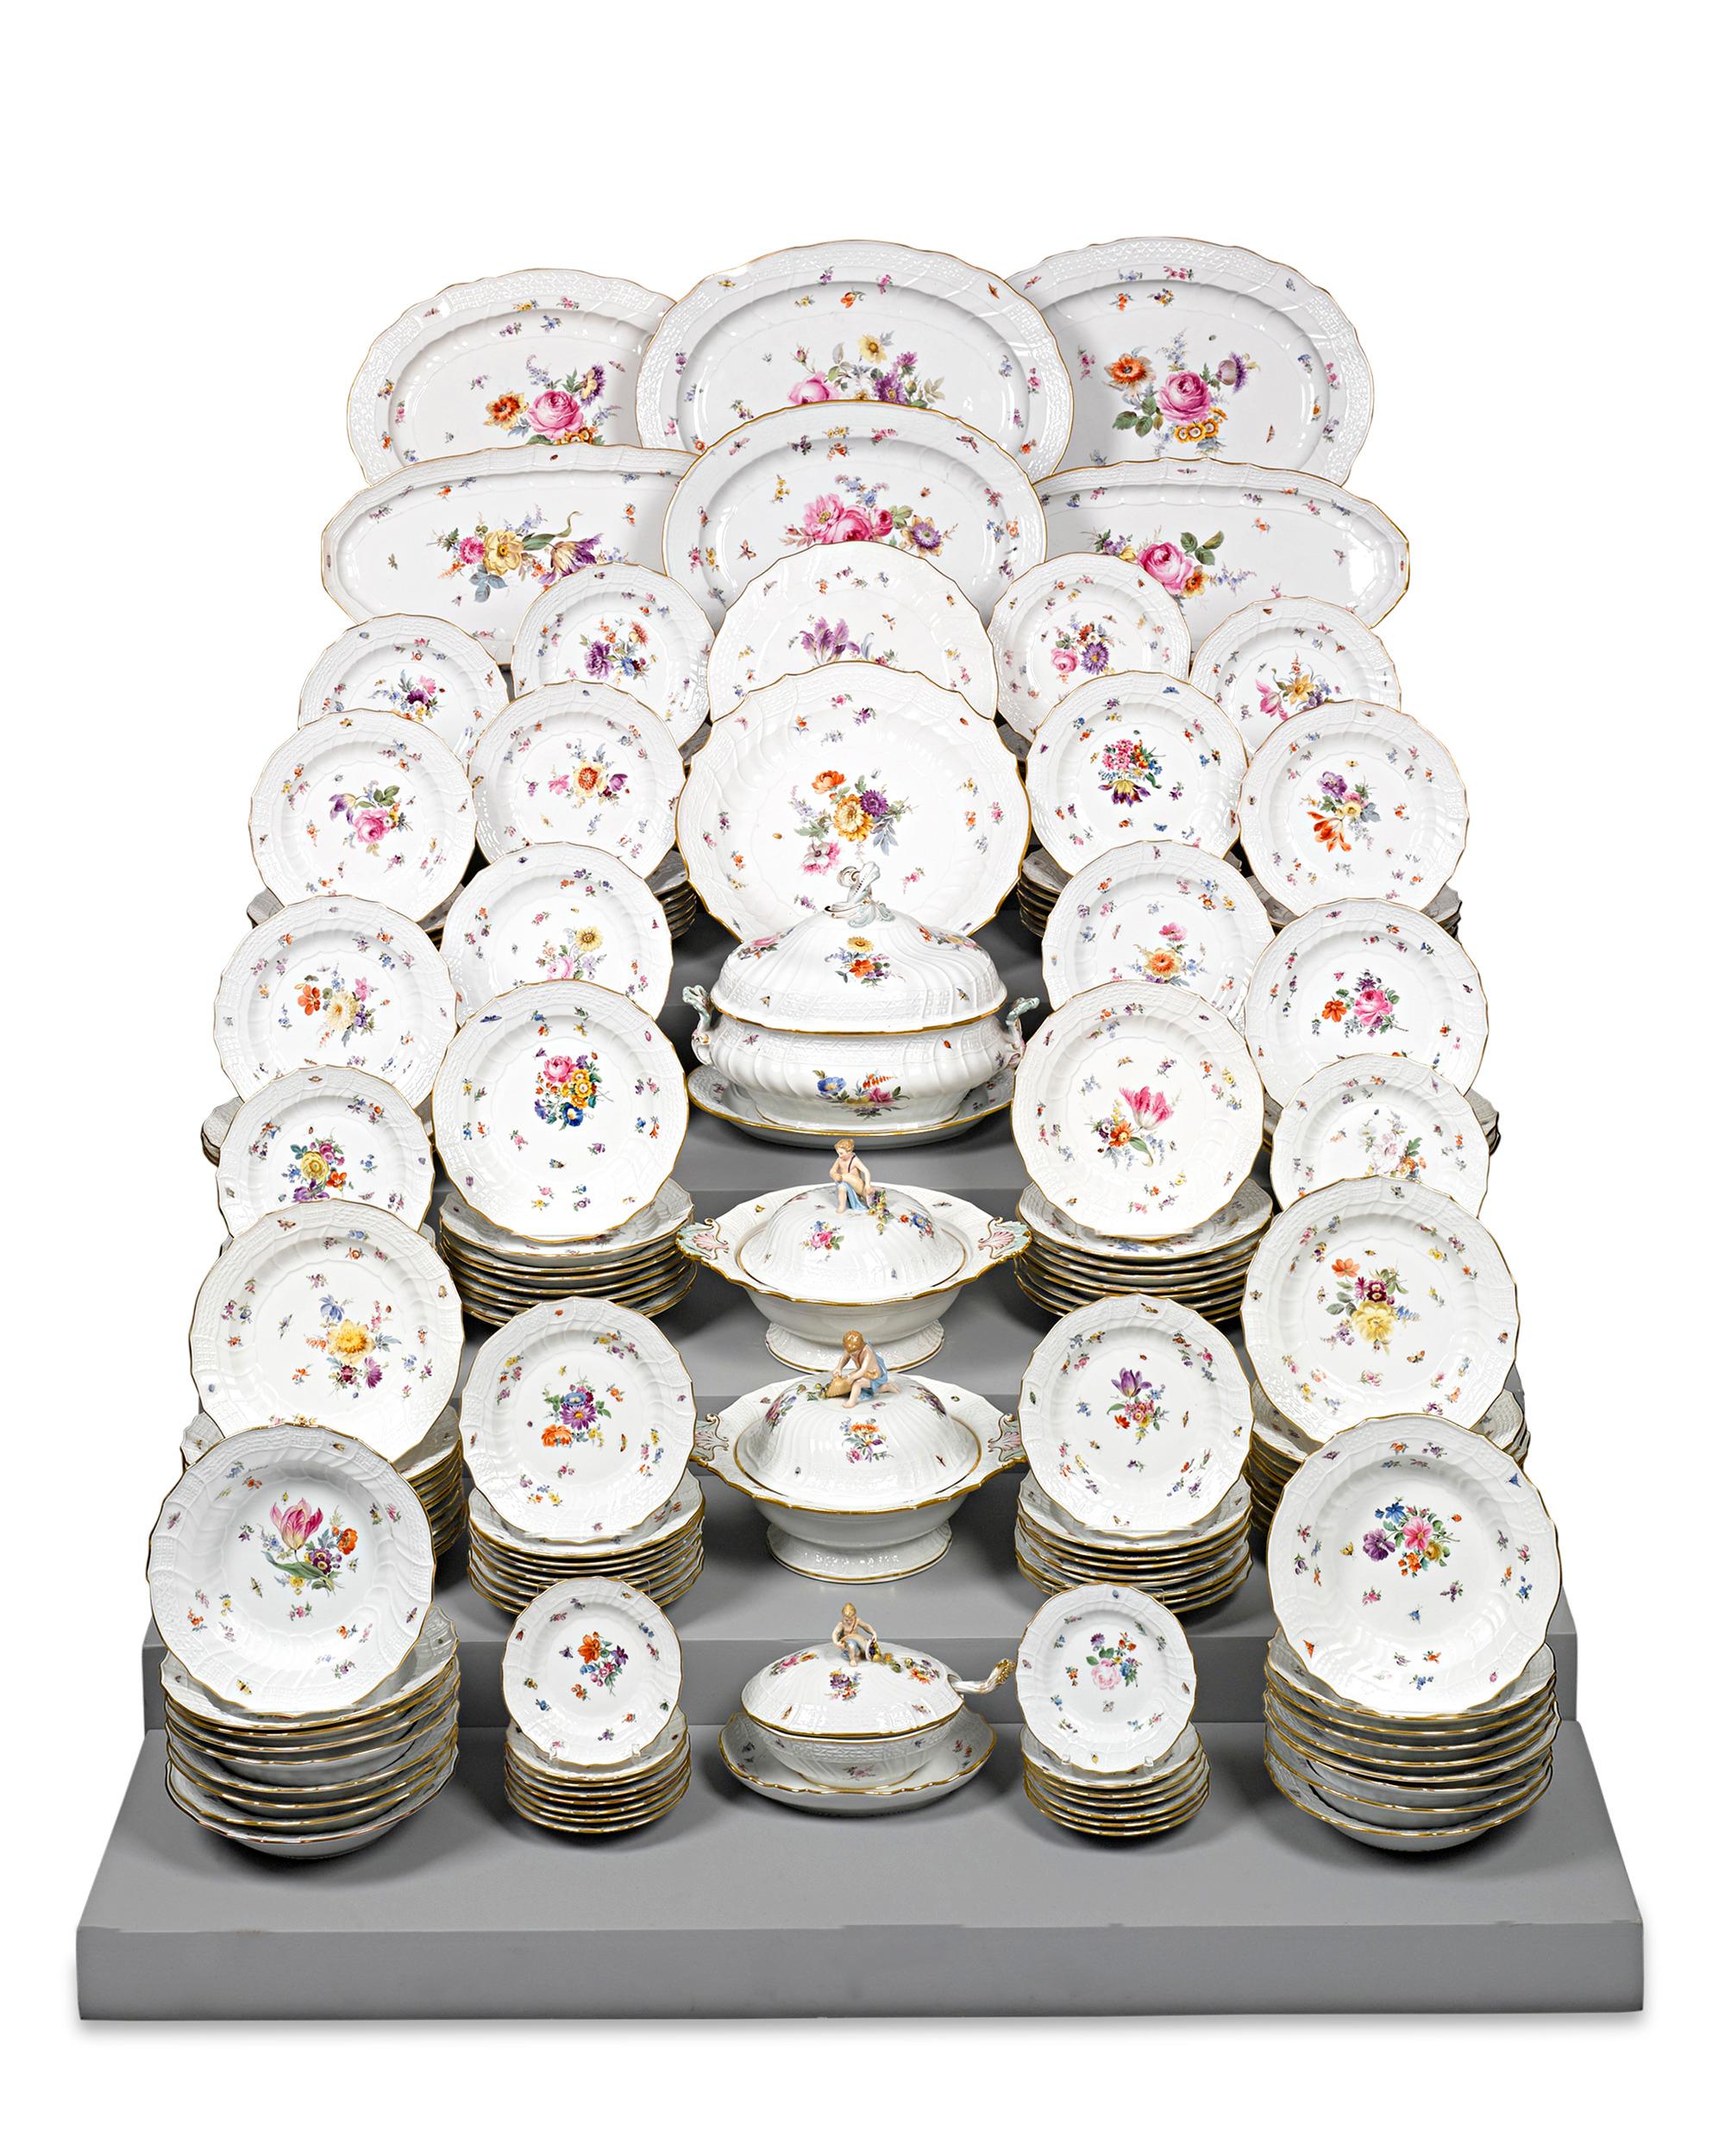 Comprising an incredible 162 pieces, this impressive Meissen porcelain dinner service is an exceptional example of the firm's prized dinnerware. The bodies are crafted in the New Brandenstein relief pattern designed by Johann Friedrich Eberlein in